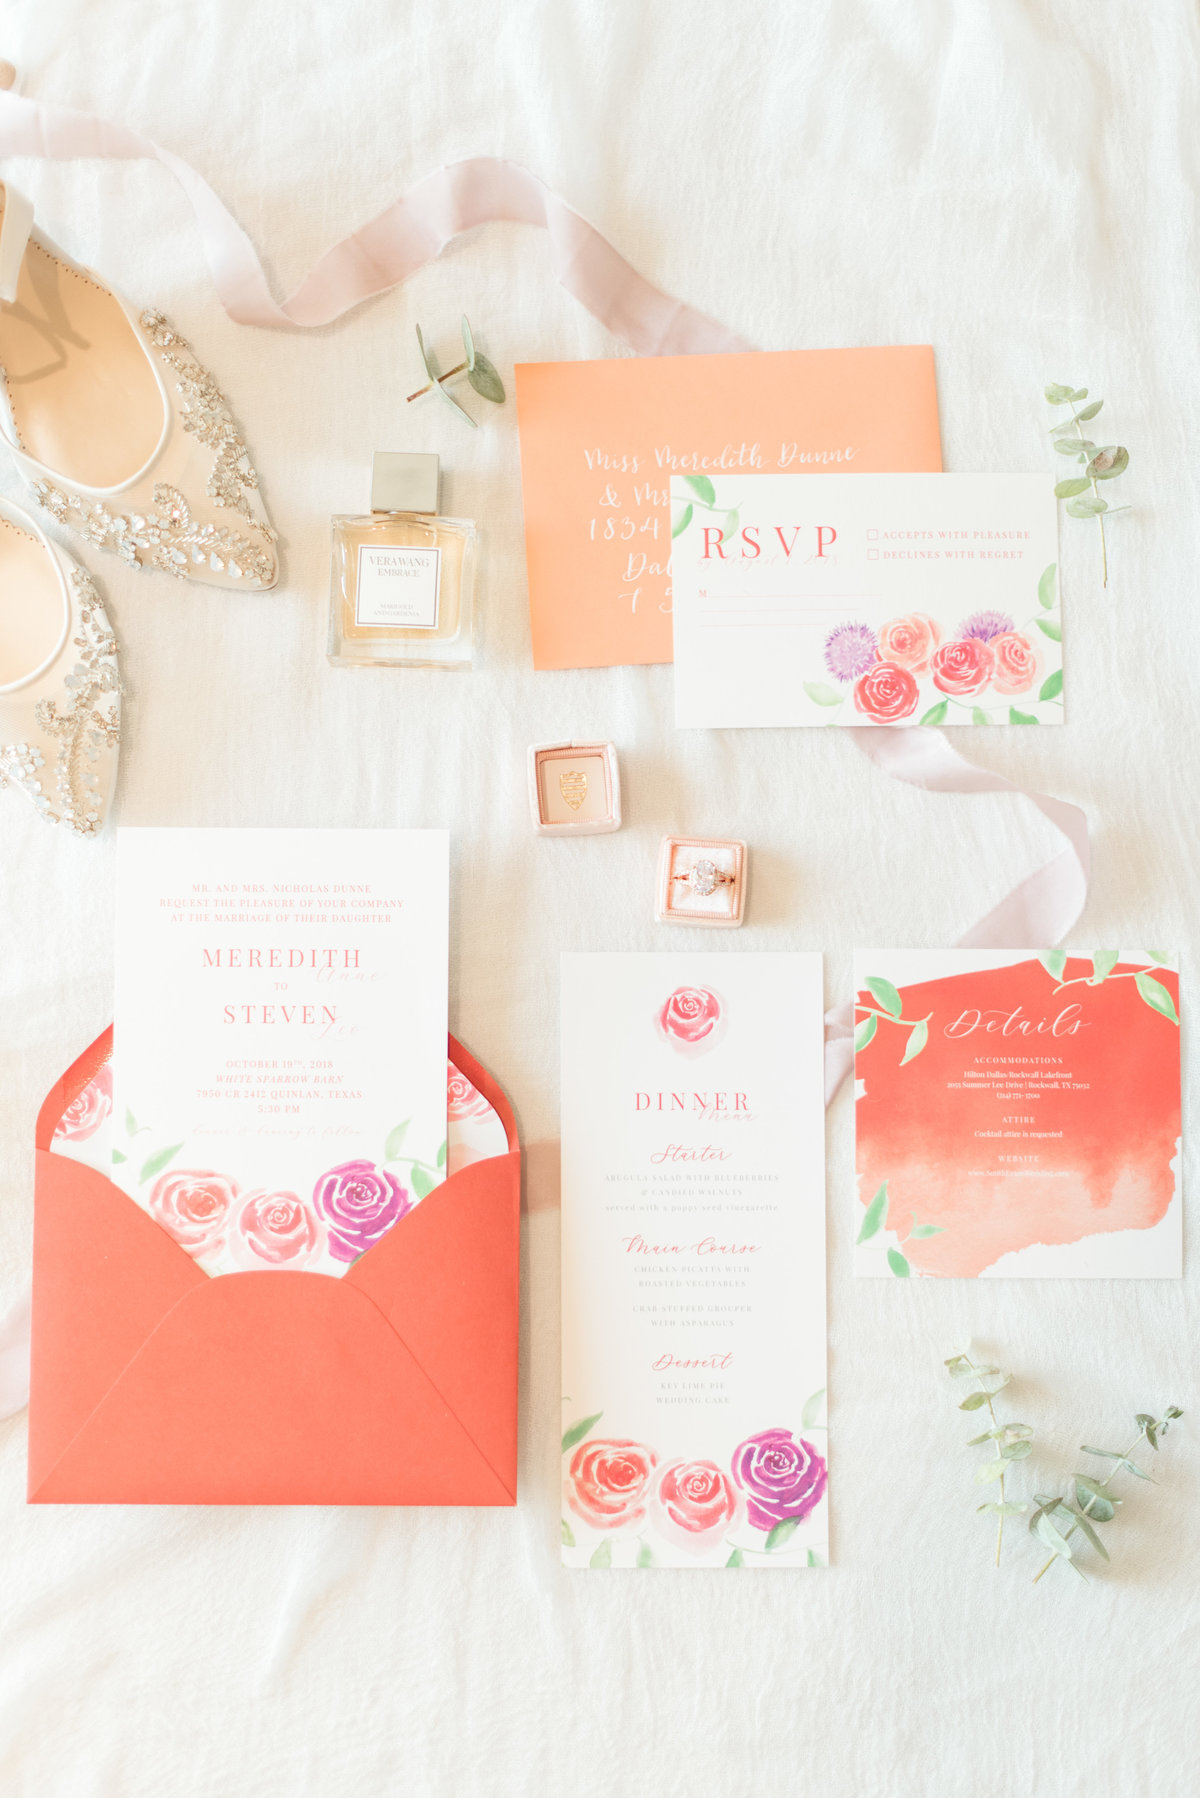 Colorful orange wedding invitations displayed on table with bride's shoe, wedding ring box, and eucalyptus.